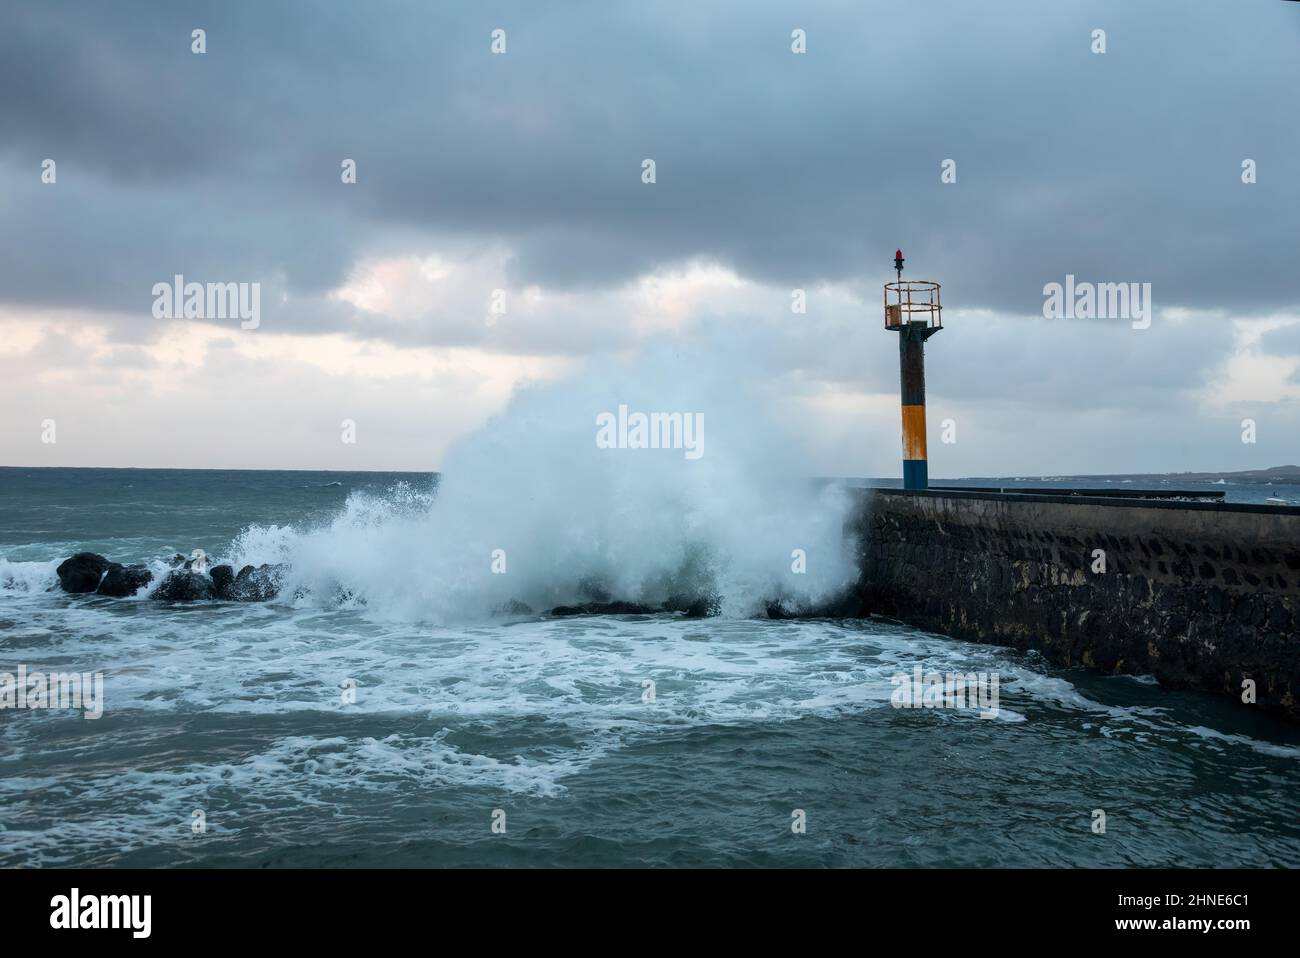 Waves and stormy weather at Arrieta, Lanzarote, Canary Islands Stock Photo